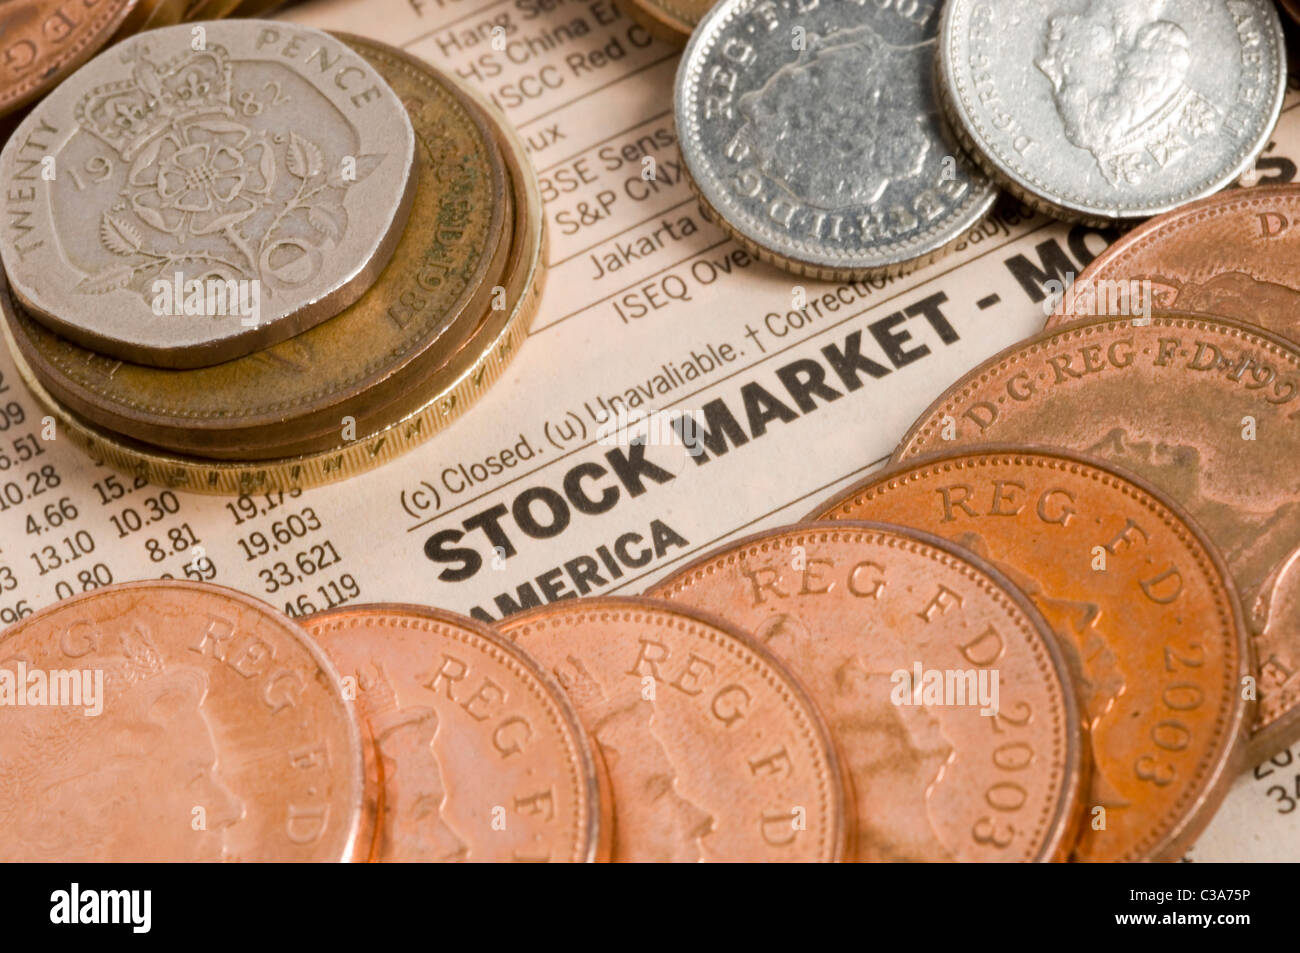 Various coins pictured on top of a stock markets newspaper page. Stock Photo